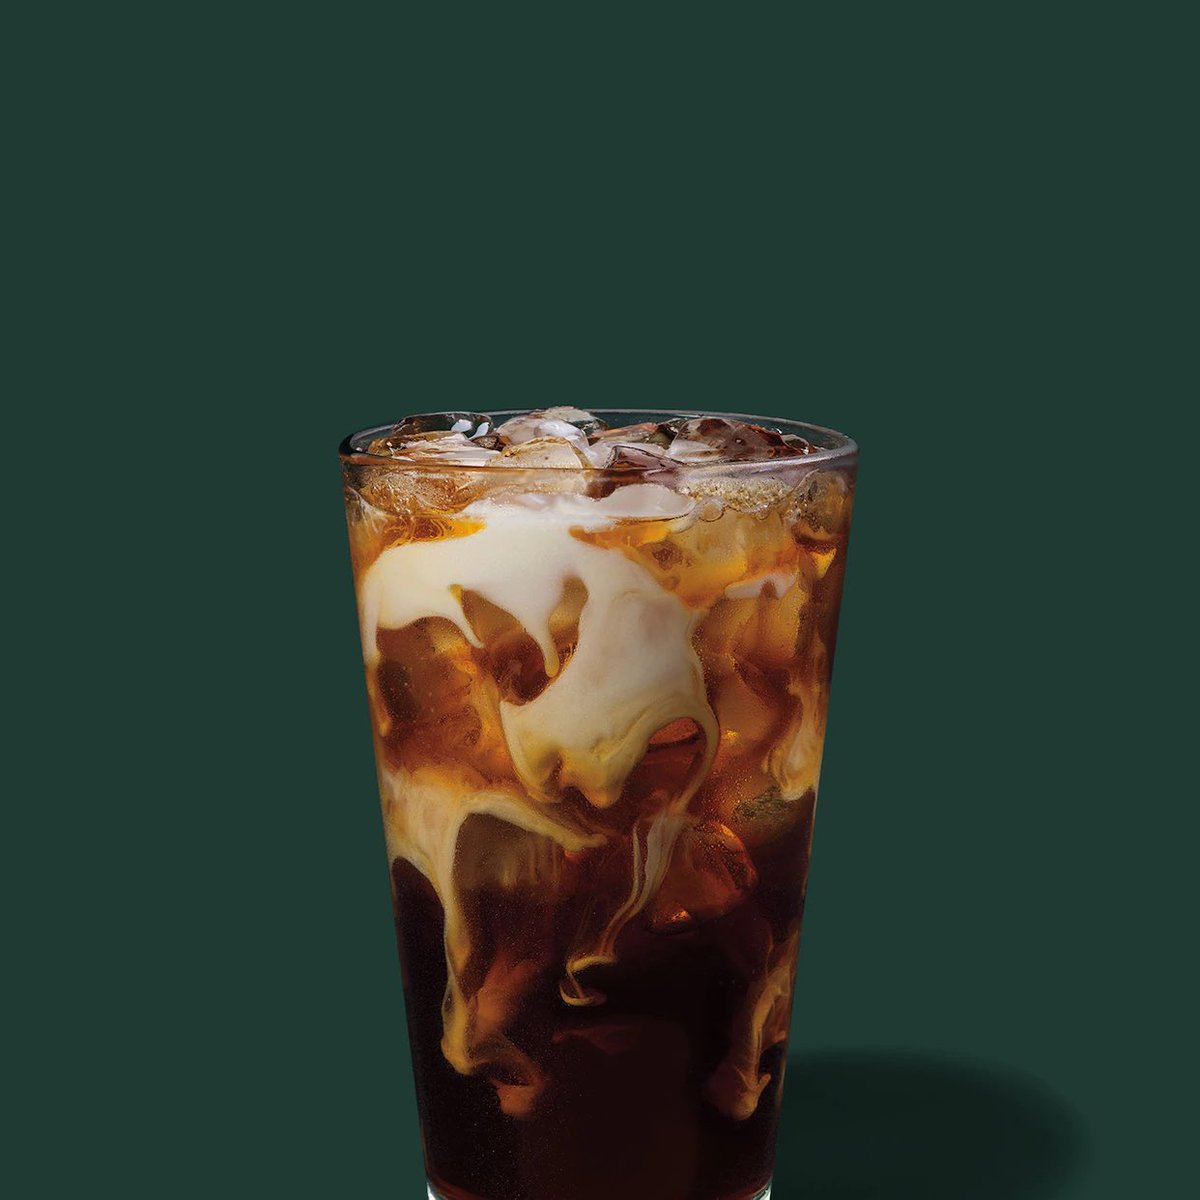 Lastly, Morgana - cold brew with sweet vanilla cream. I feel like M wants a strong coffee that could give her a heart attack at any moment but also has a bit of sweetness.